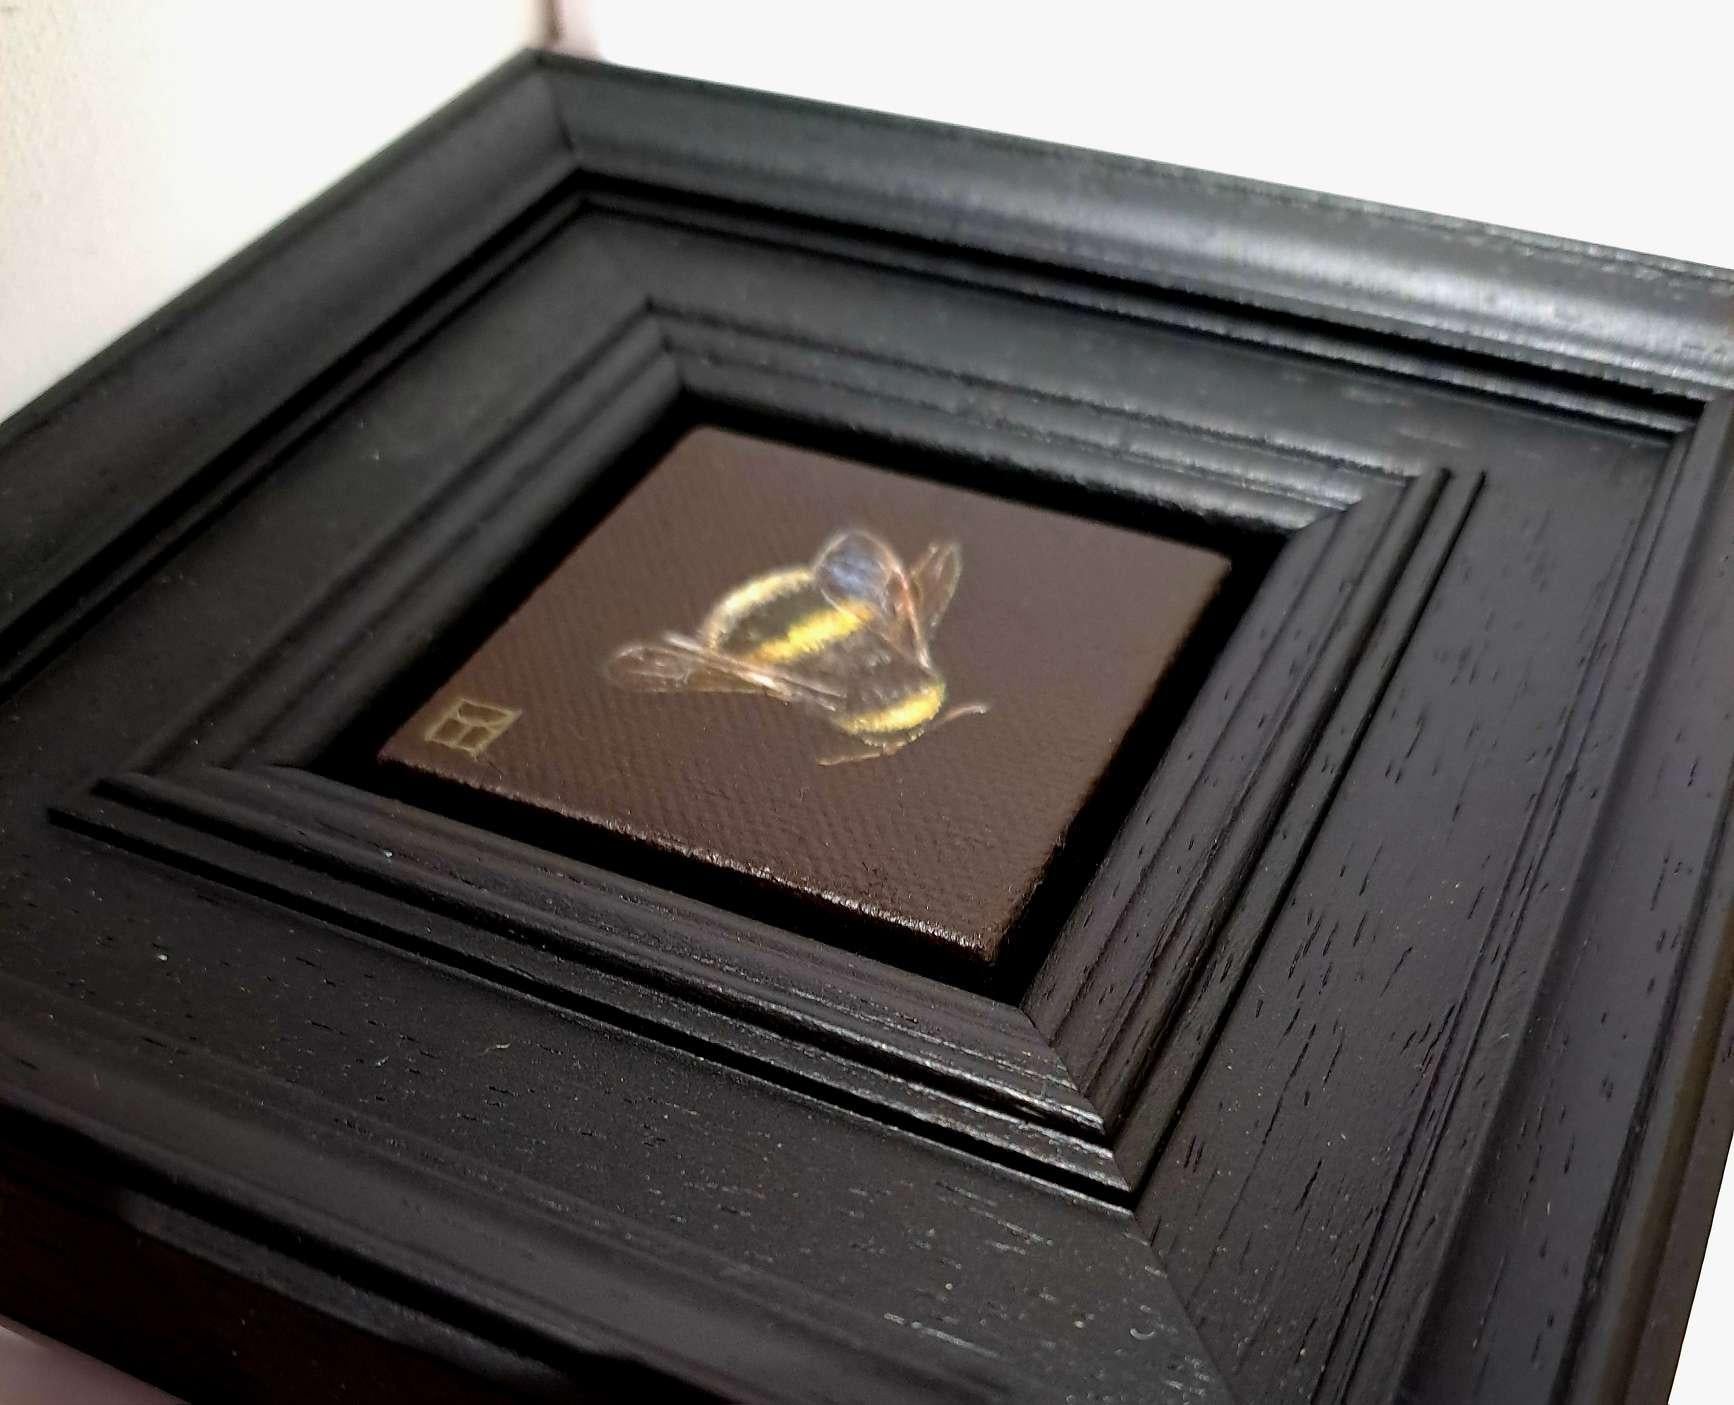 Pocket Bumble Bee 3 is an original oil painting by Dani Humberstone as part of her Pocket Painting series featuring small scale realistic oil paintings, with a nod to baroque still life painting. The paintings are set in a black wood layered